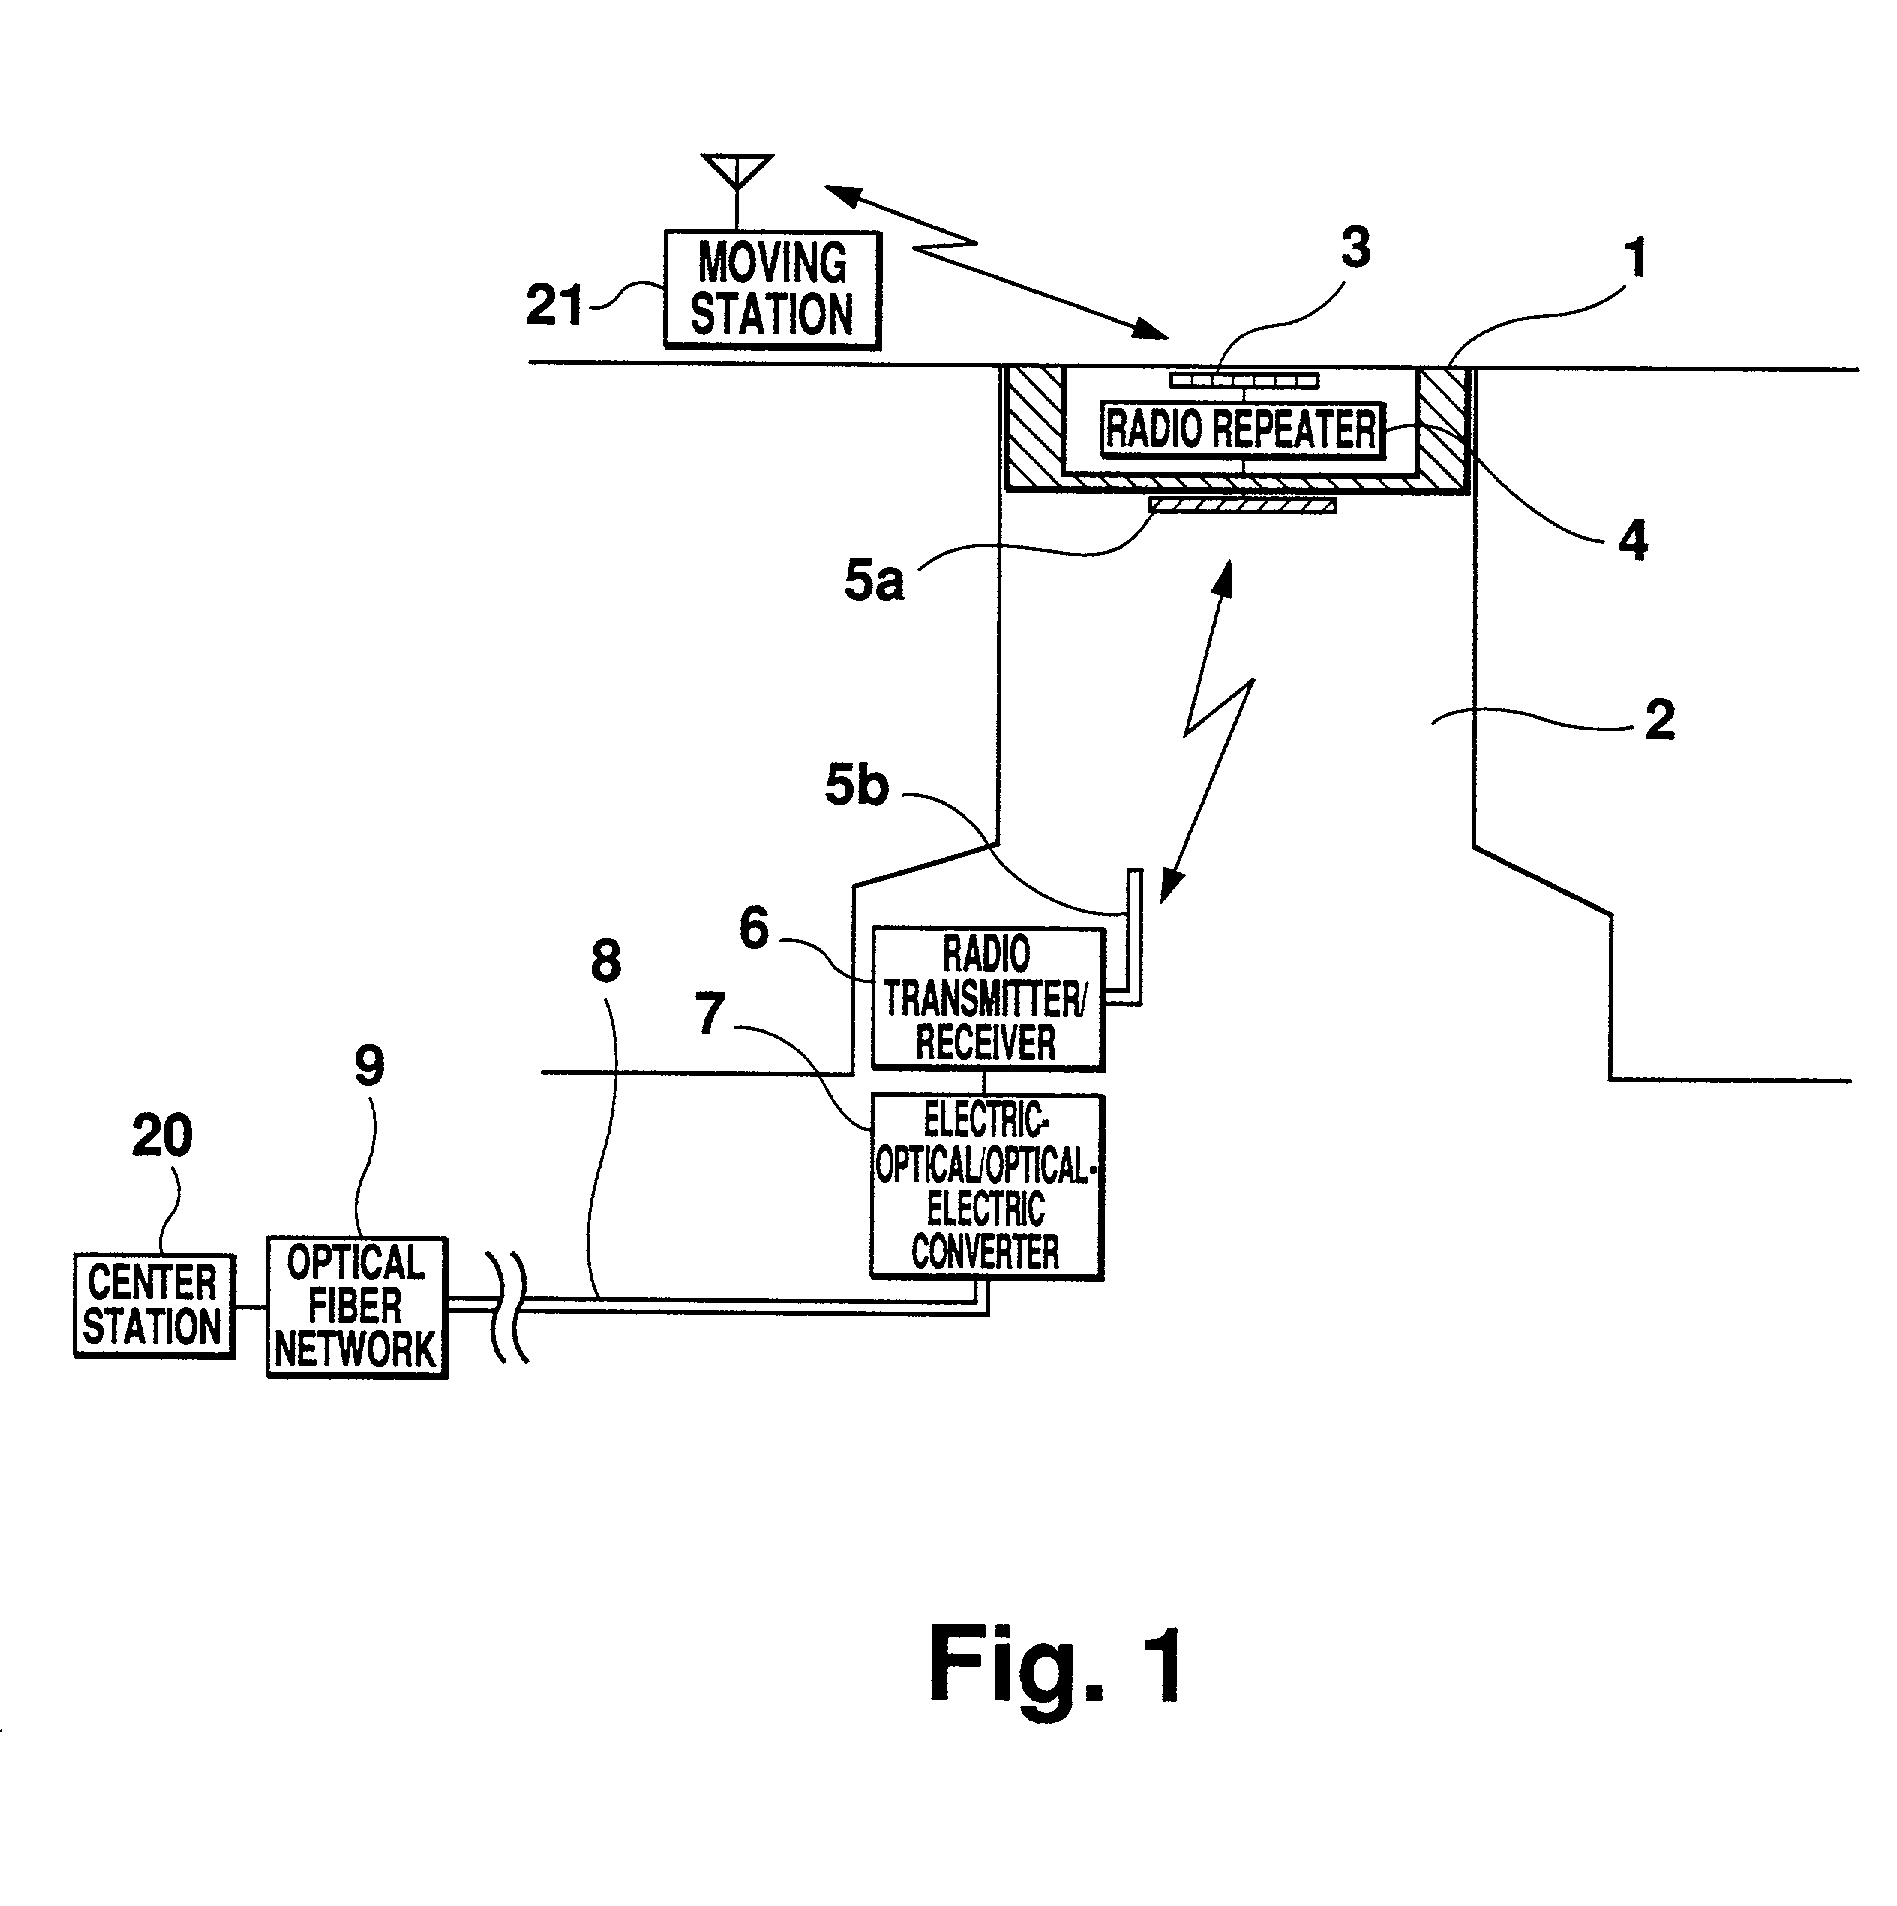 Underground information communication system and related manhole cover